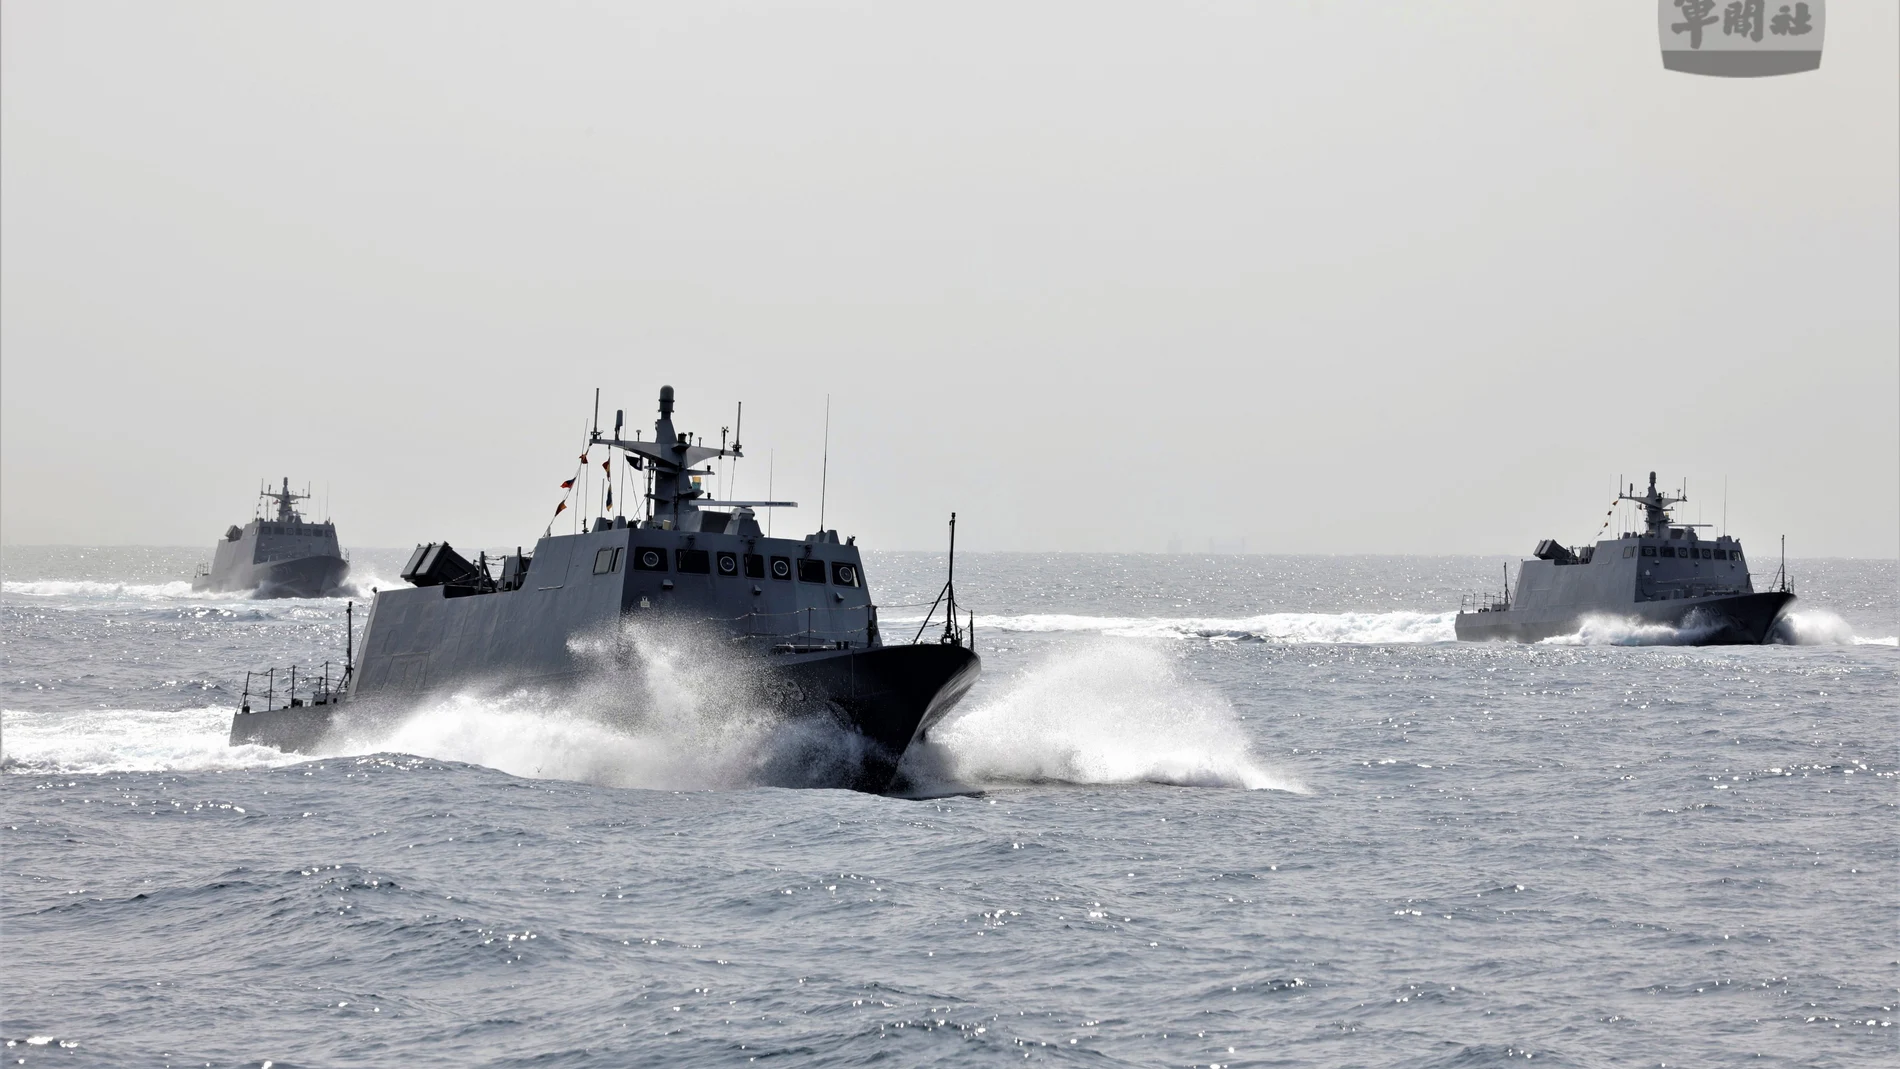 - (Taiwan), 10/04/2023.- A handout photo provided by the Taiwan Ministry of National Defense shows Taiwan Navy vessels FACG (Fast Attack Craft, Guided missile) sail at an undisclosed location, 10 April 2023. The People's Liberation Army (PLA) is holding a military exercise in the Fujian Province, Pingtan County, the closest point to Taiwan after China announced three days of military drills around Taiwan